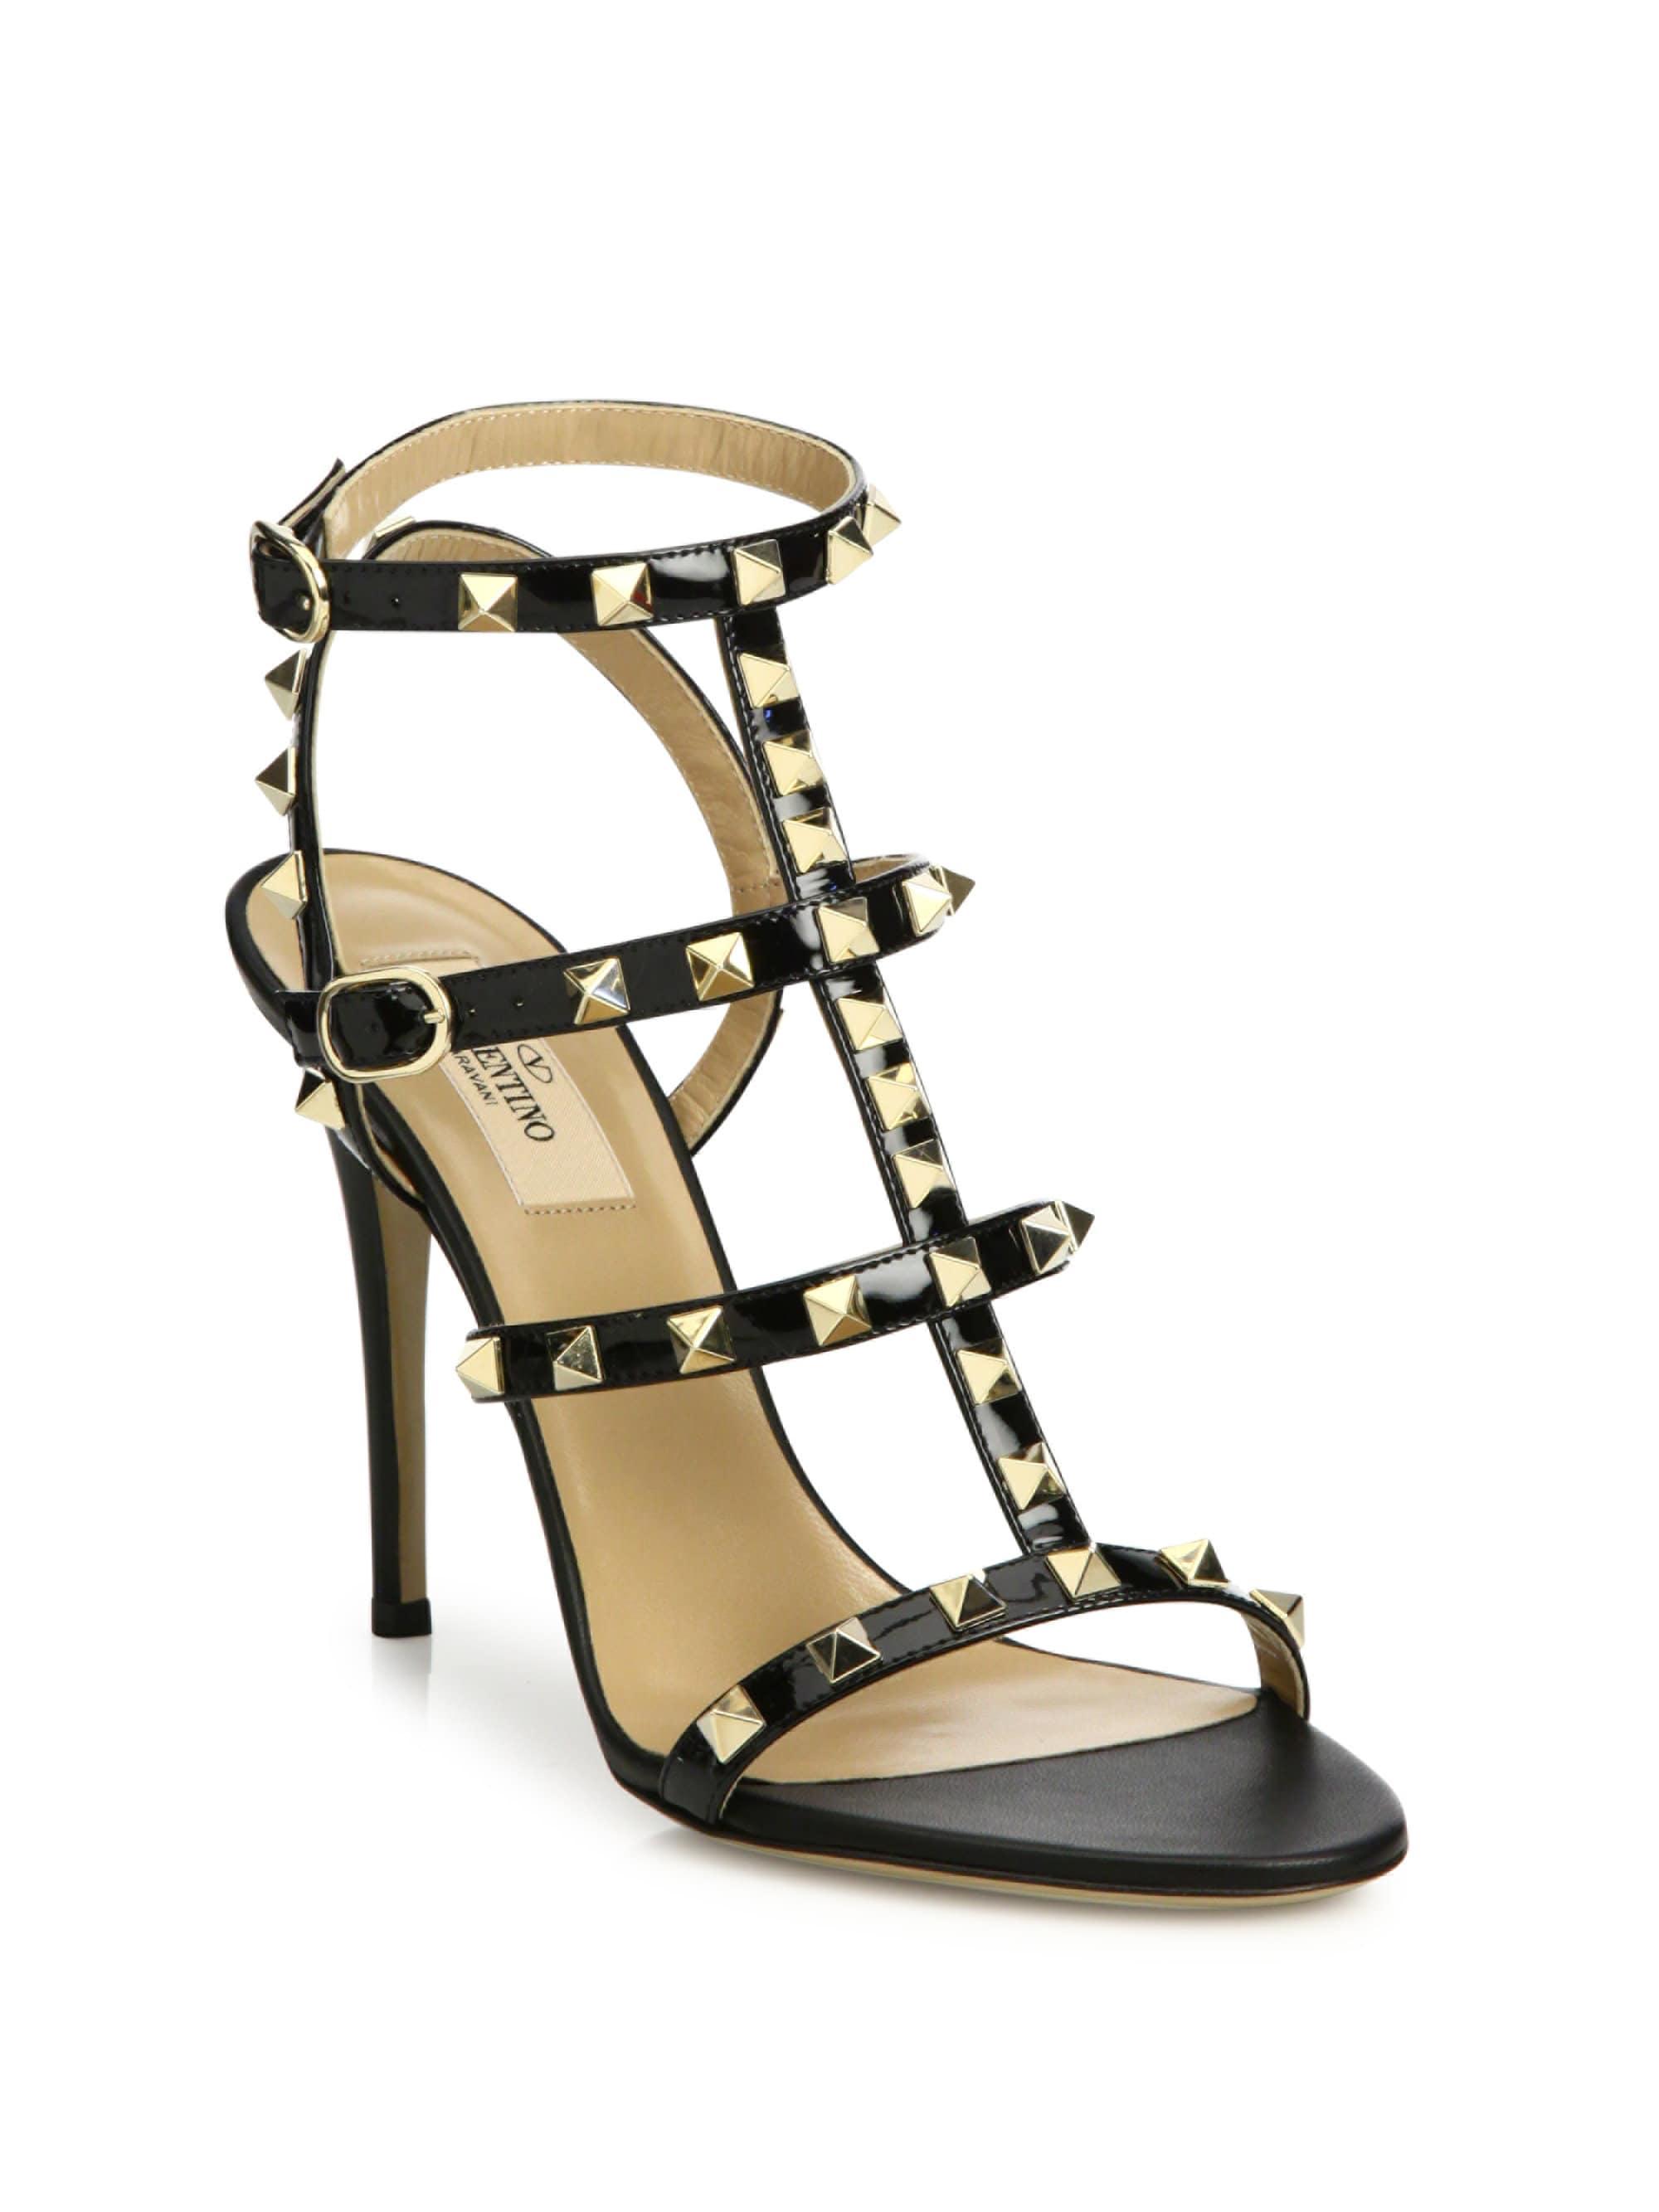 Valentino Rockstud Patent Leather Cage Sandals in Black (Natural) - Lyst